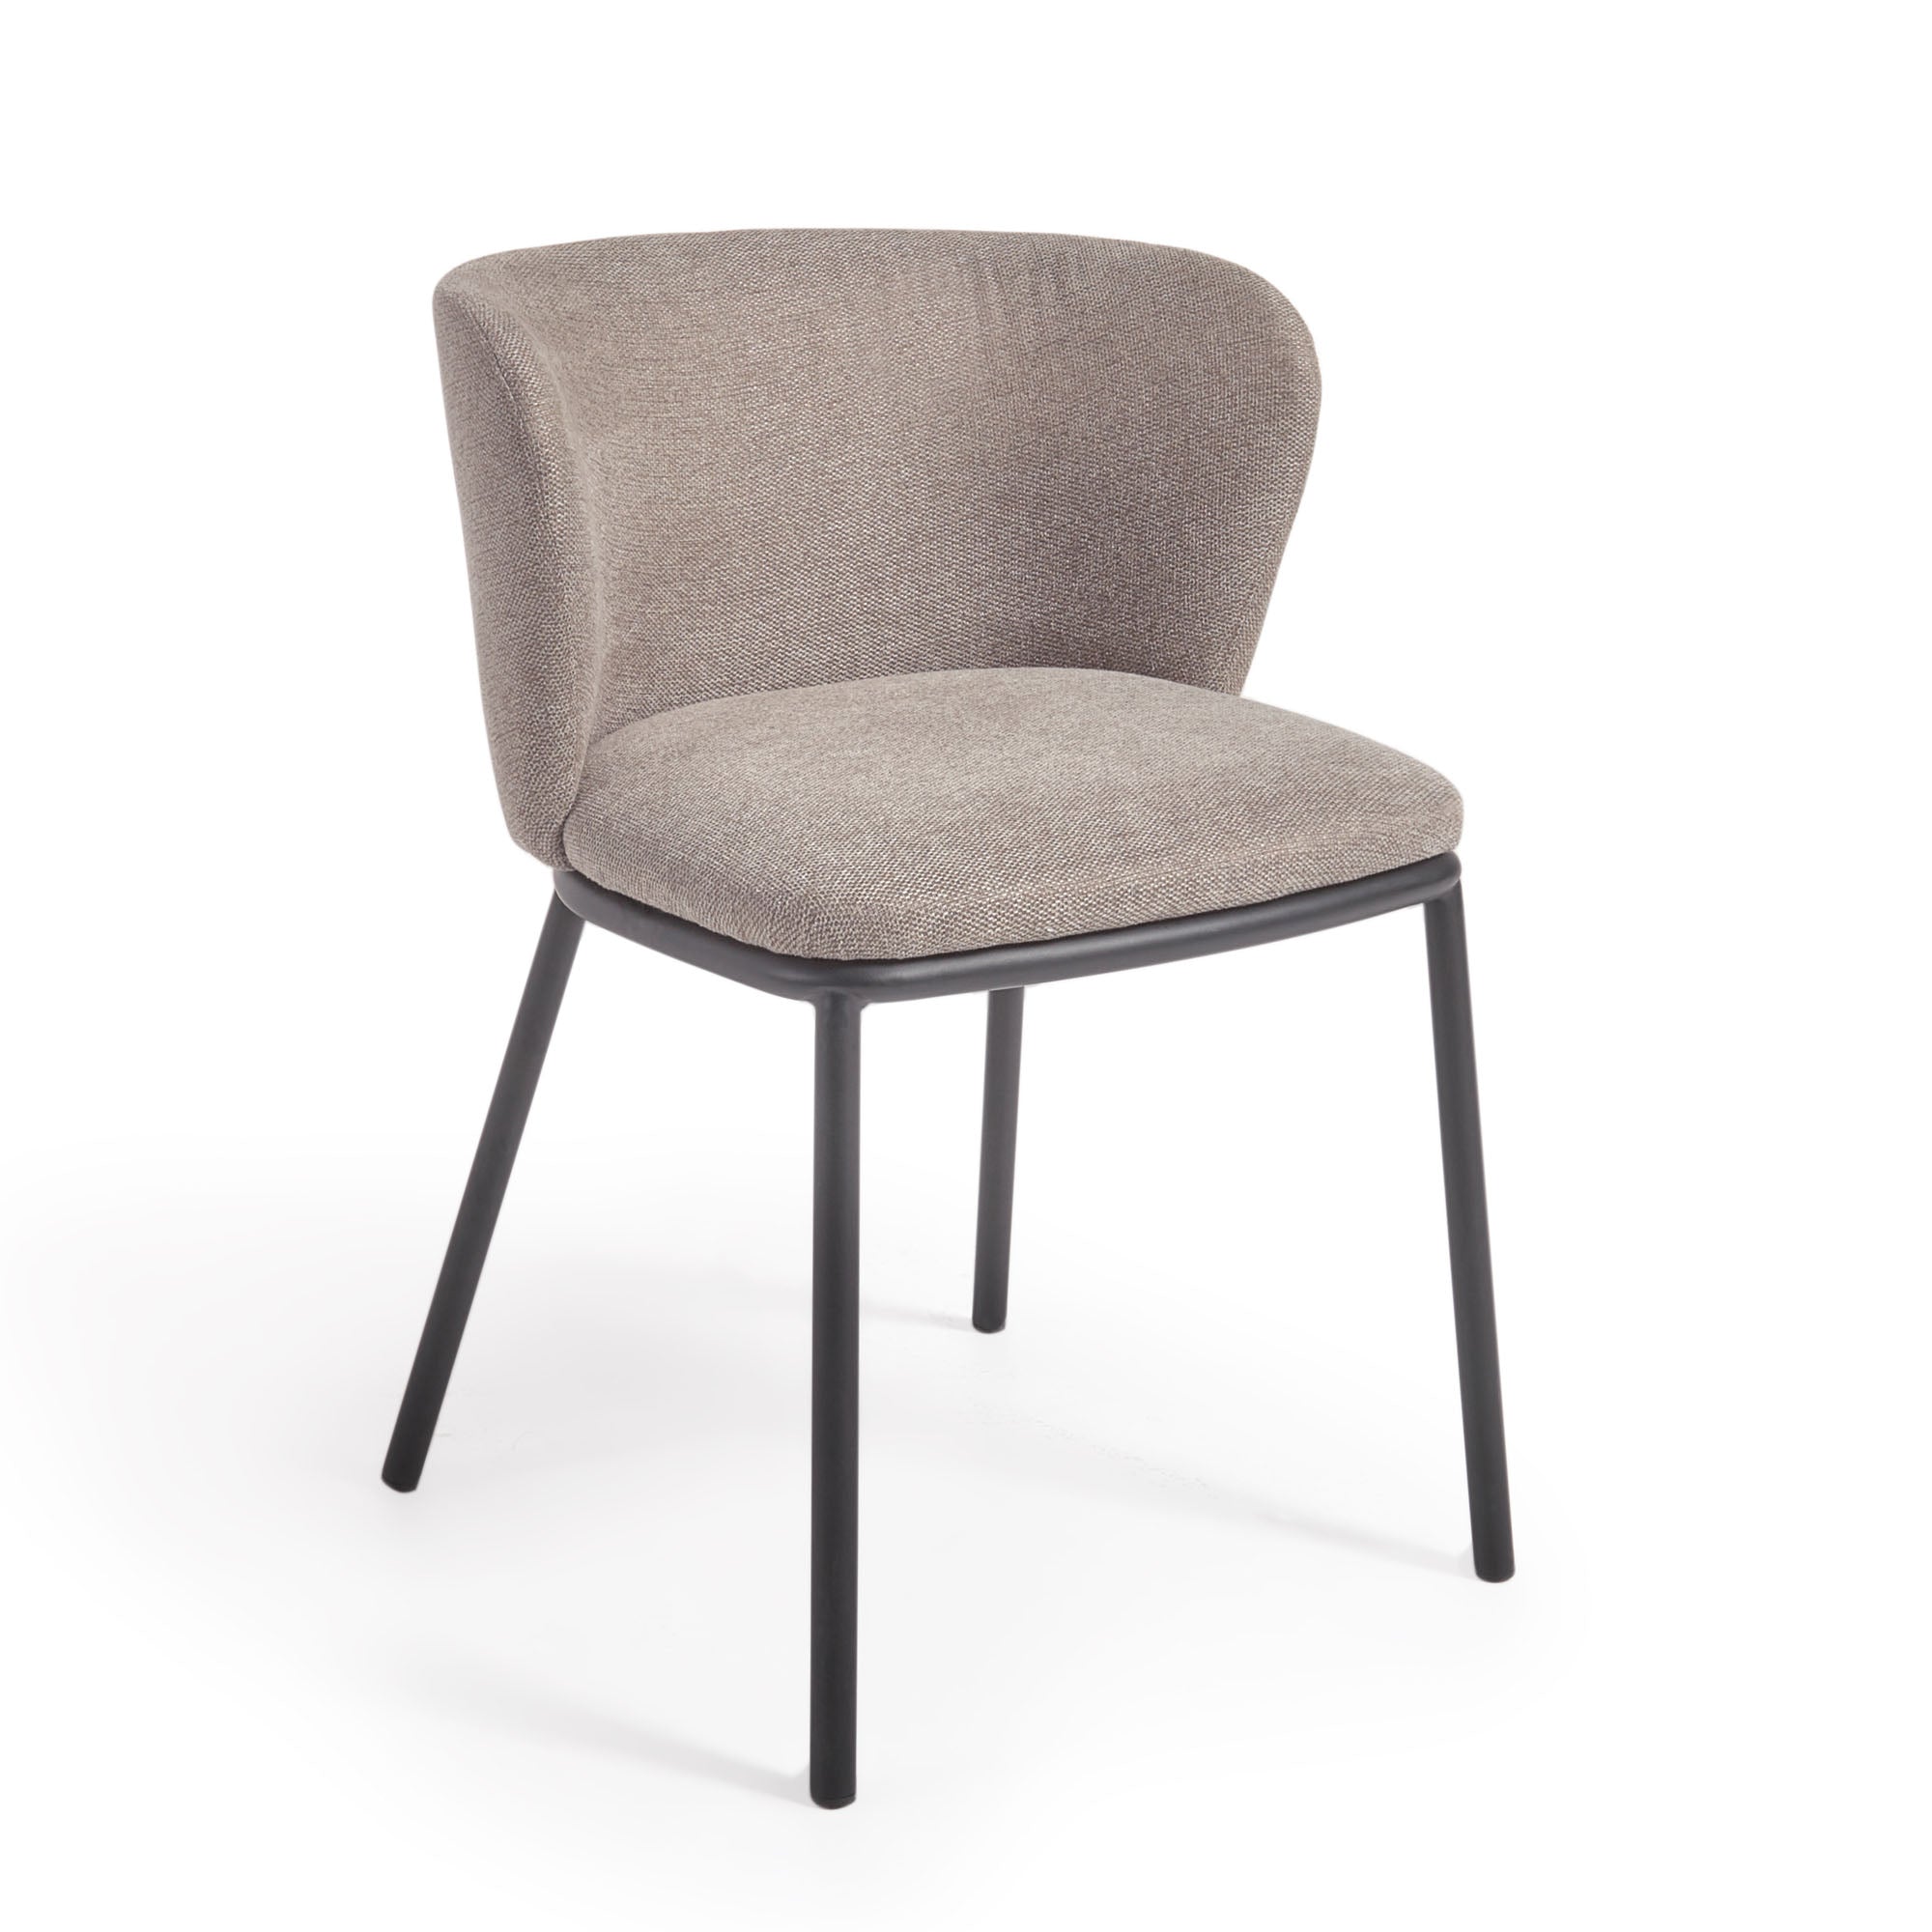 Ciselia chair in light brown chenille and black steel